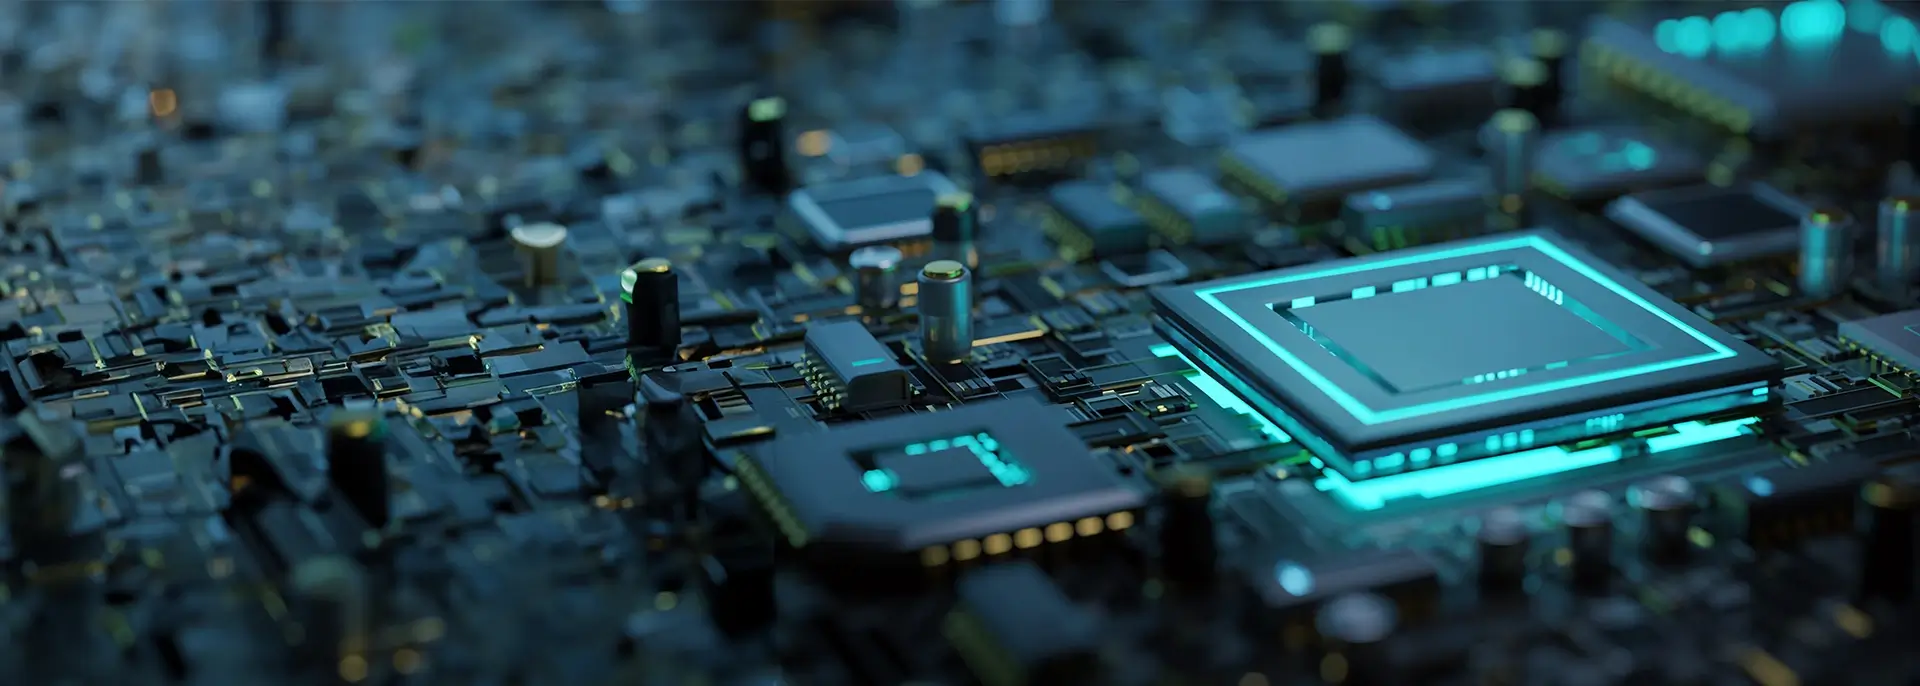 Close-up of a semiconductor